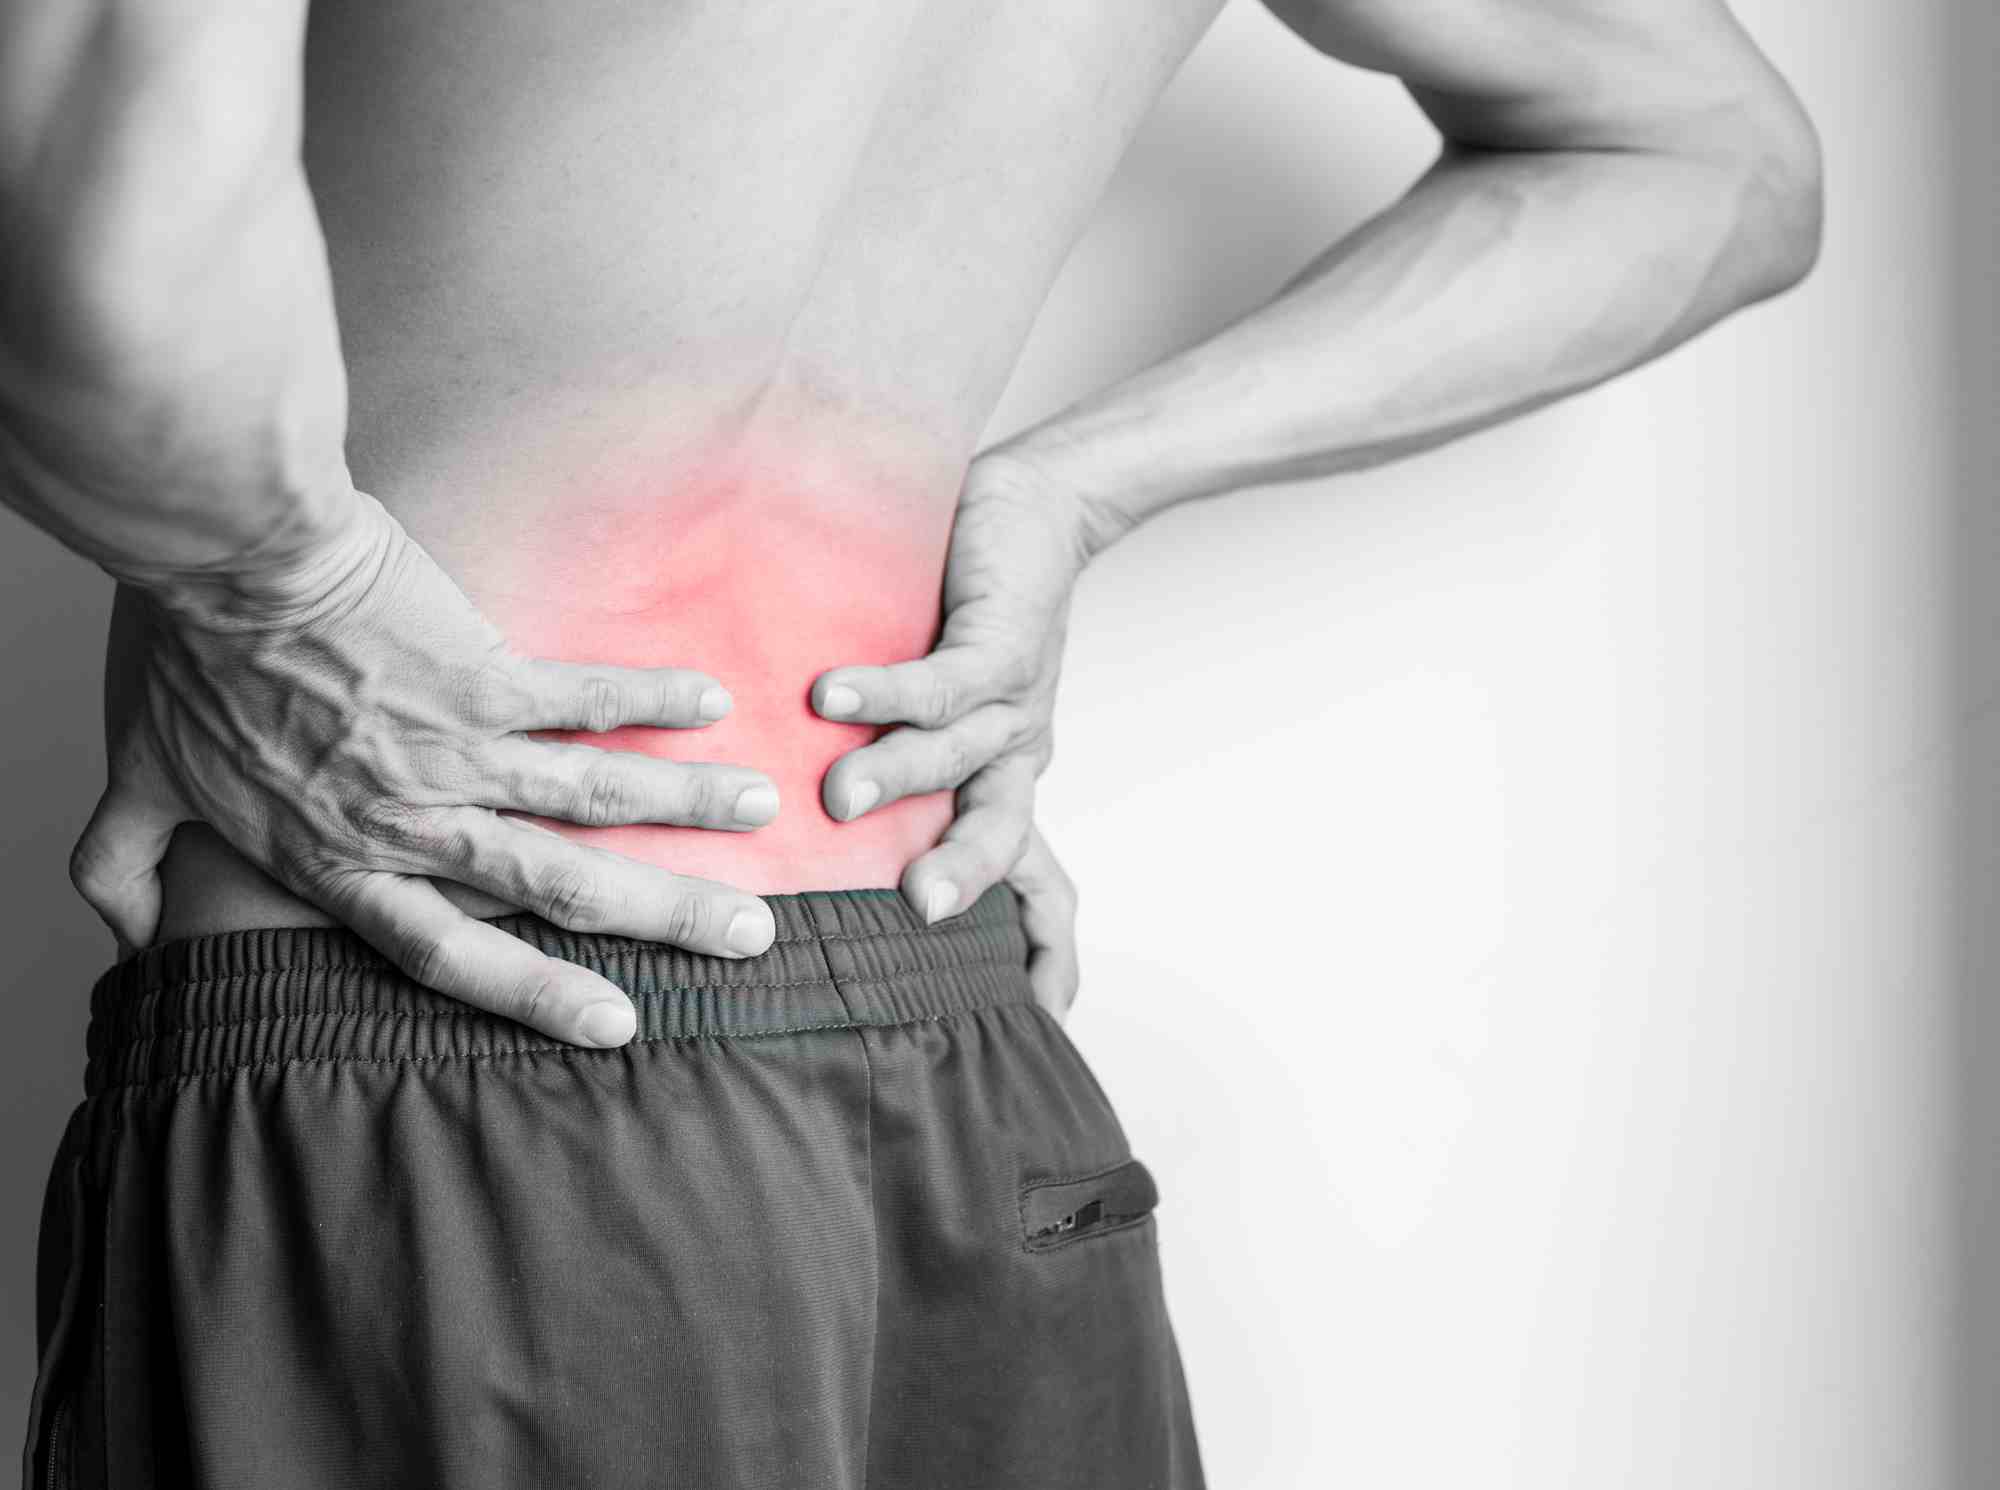 Strategies for Alleviating Back Pain